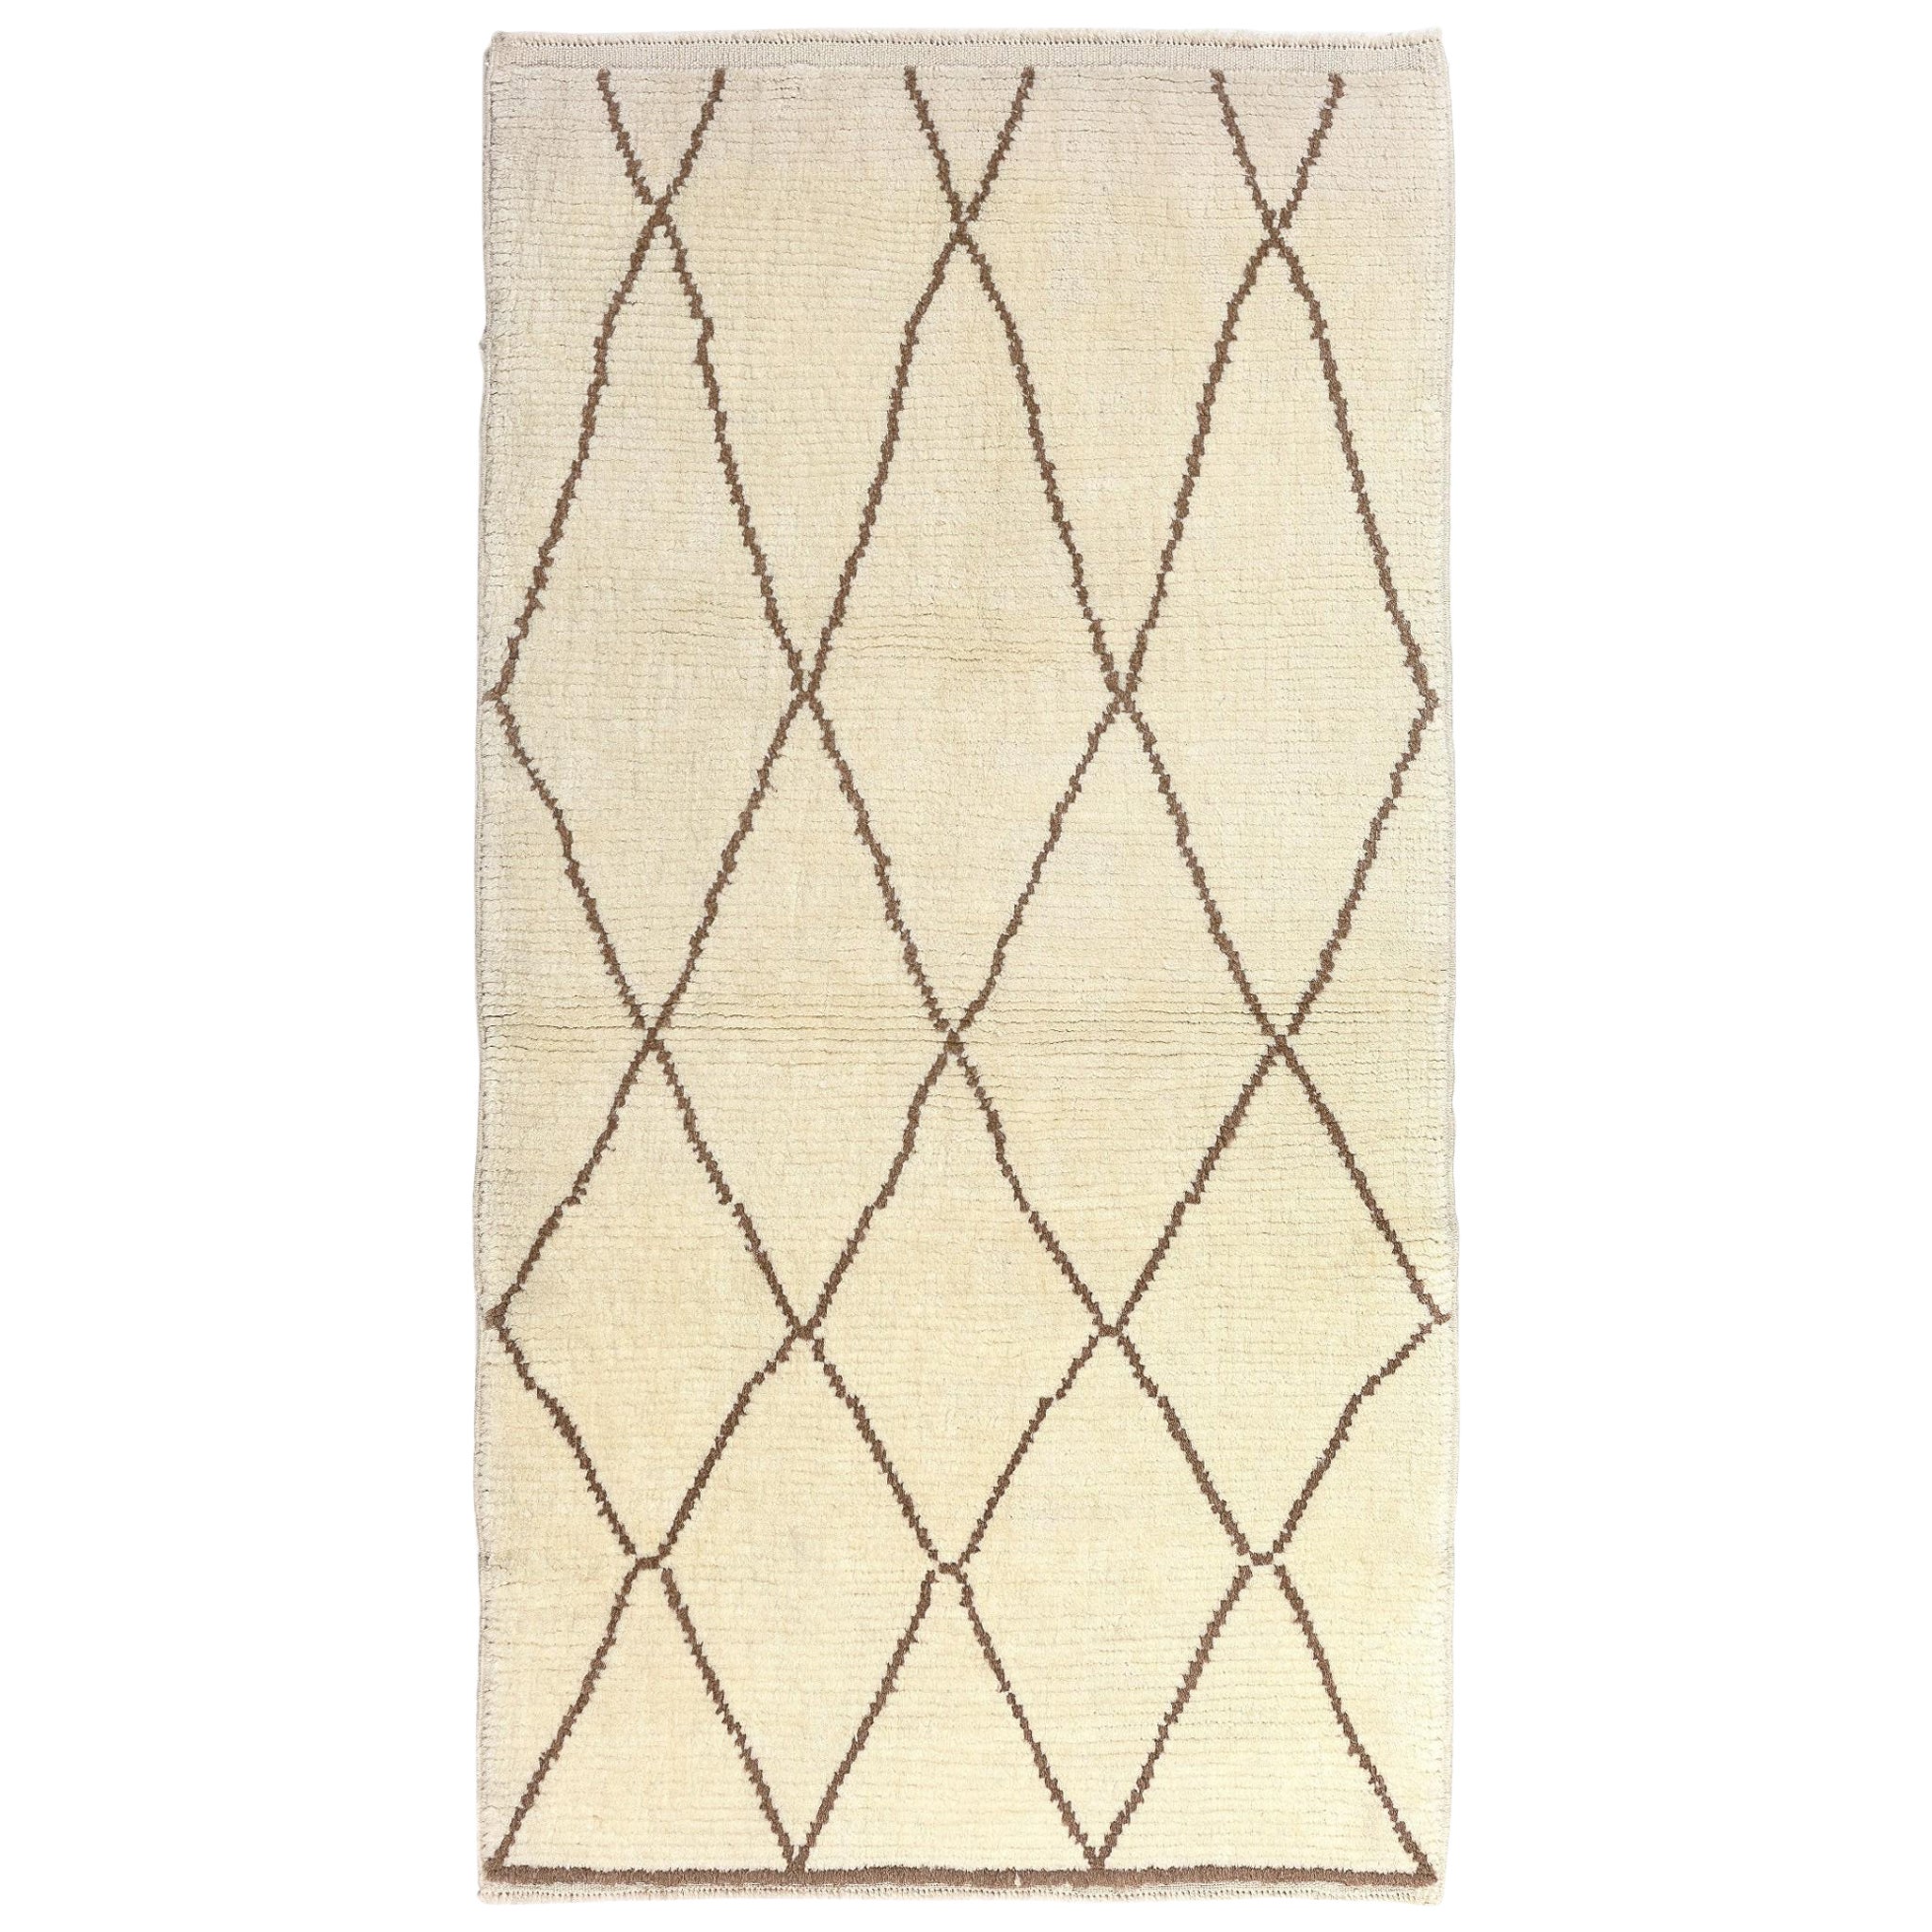 3.4x6 Ft Modern Moroccan Rug, 100% Natural Undyed Wool, Custom Options Available For Sale